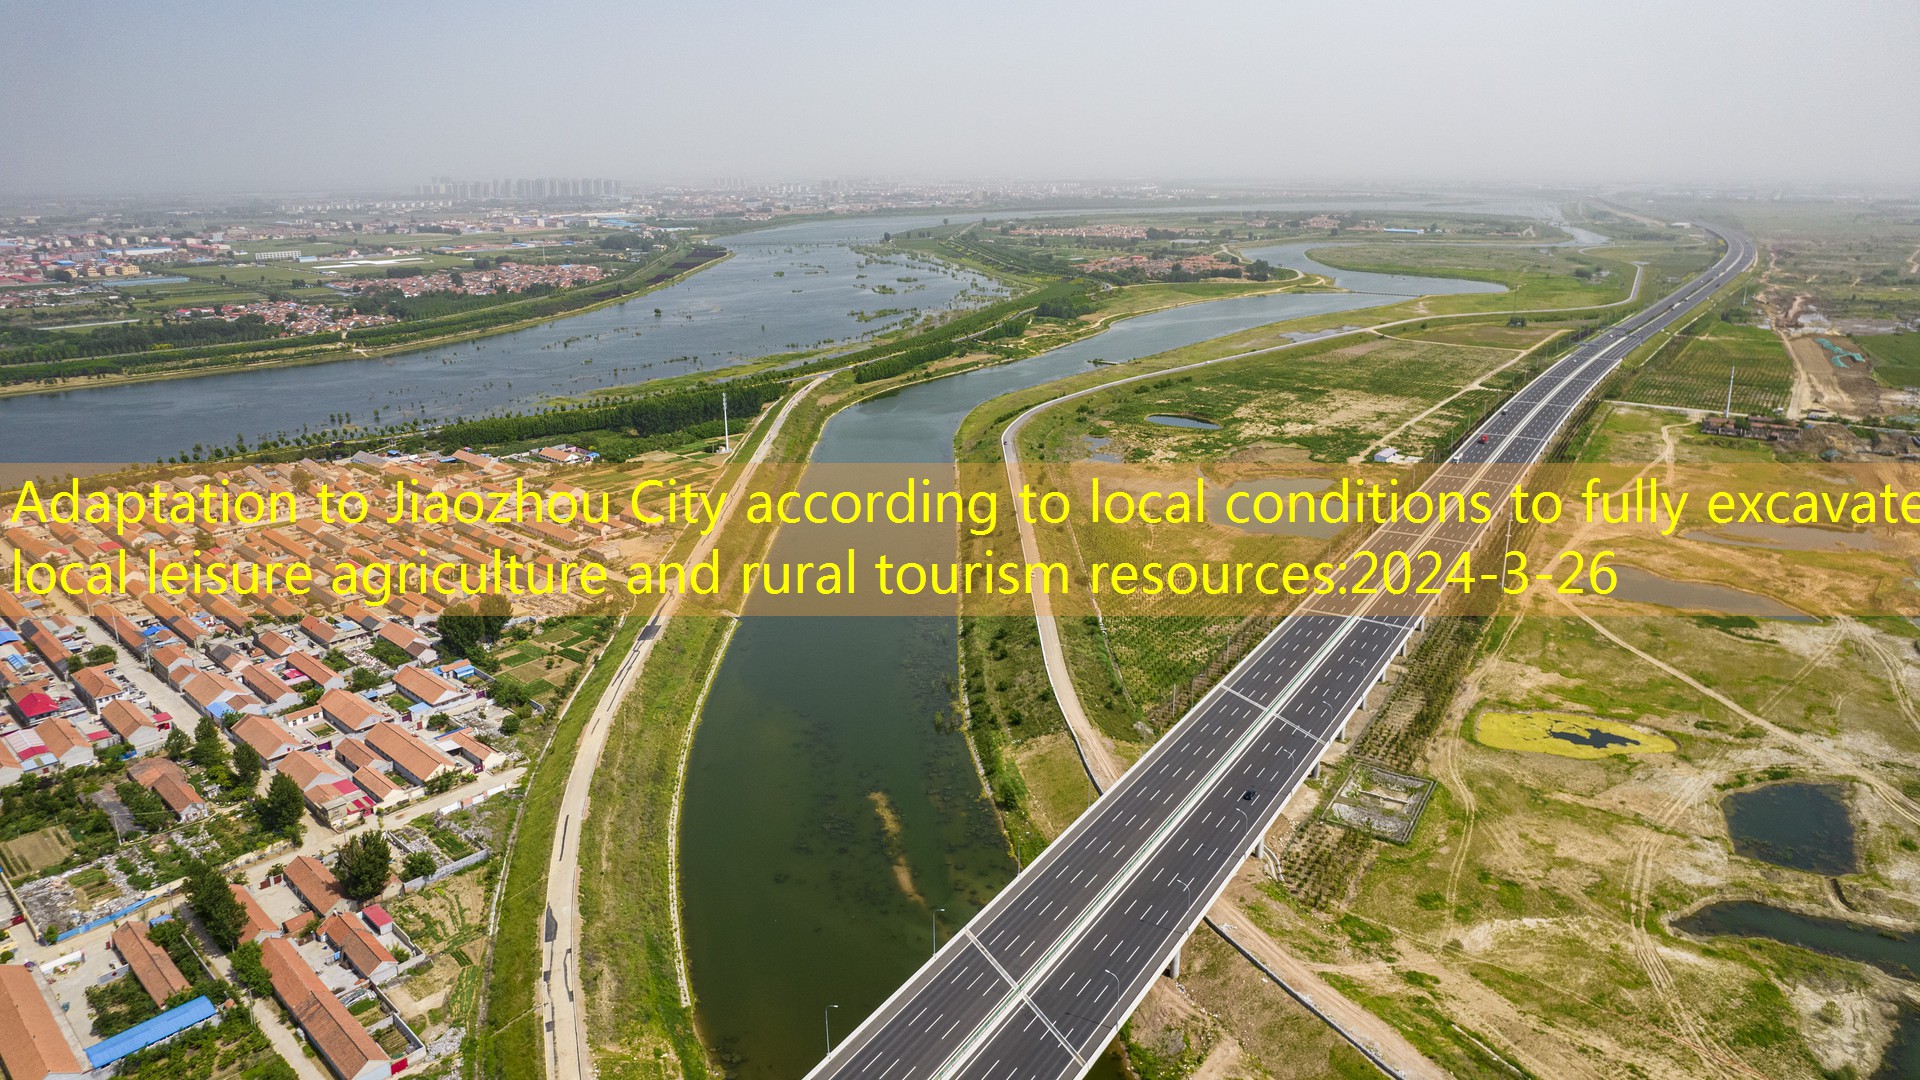 Adaptation to Jiaozhou City according to local conditions to fully excavate local leisure agriculture and rural tourism resources